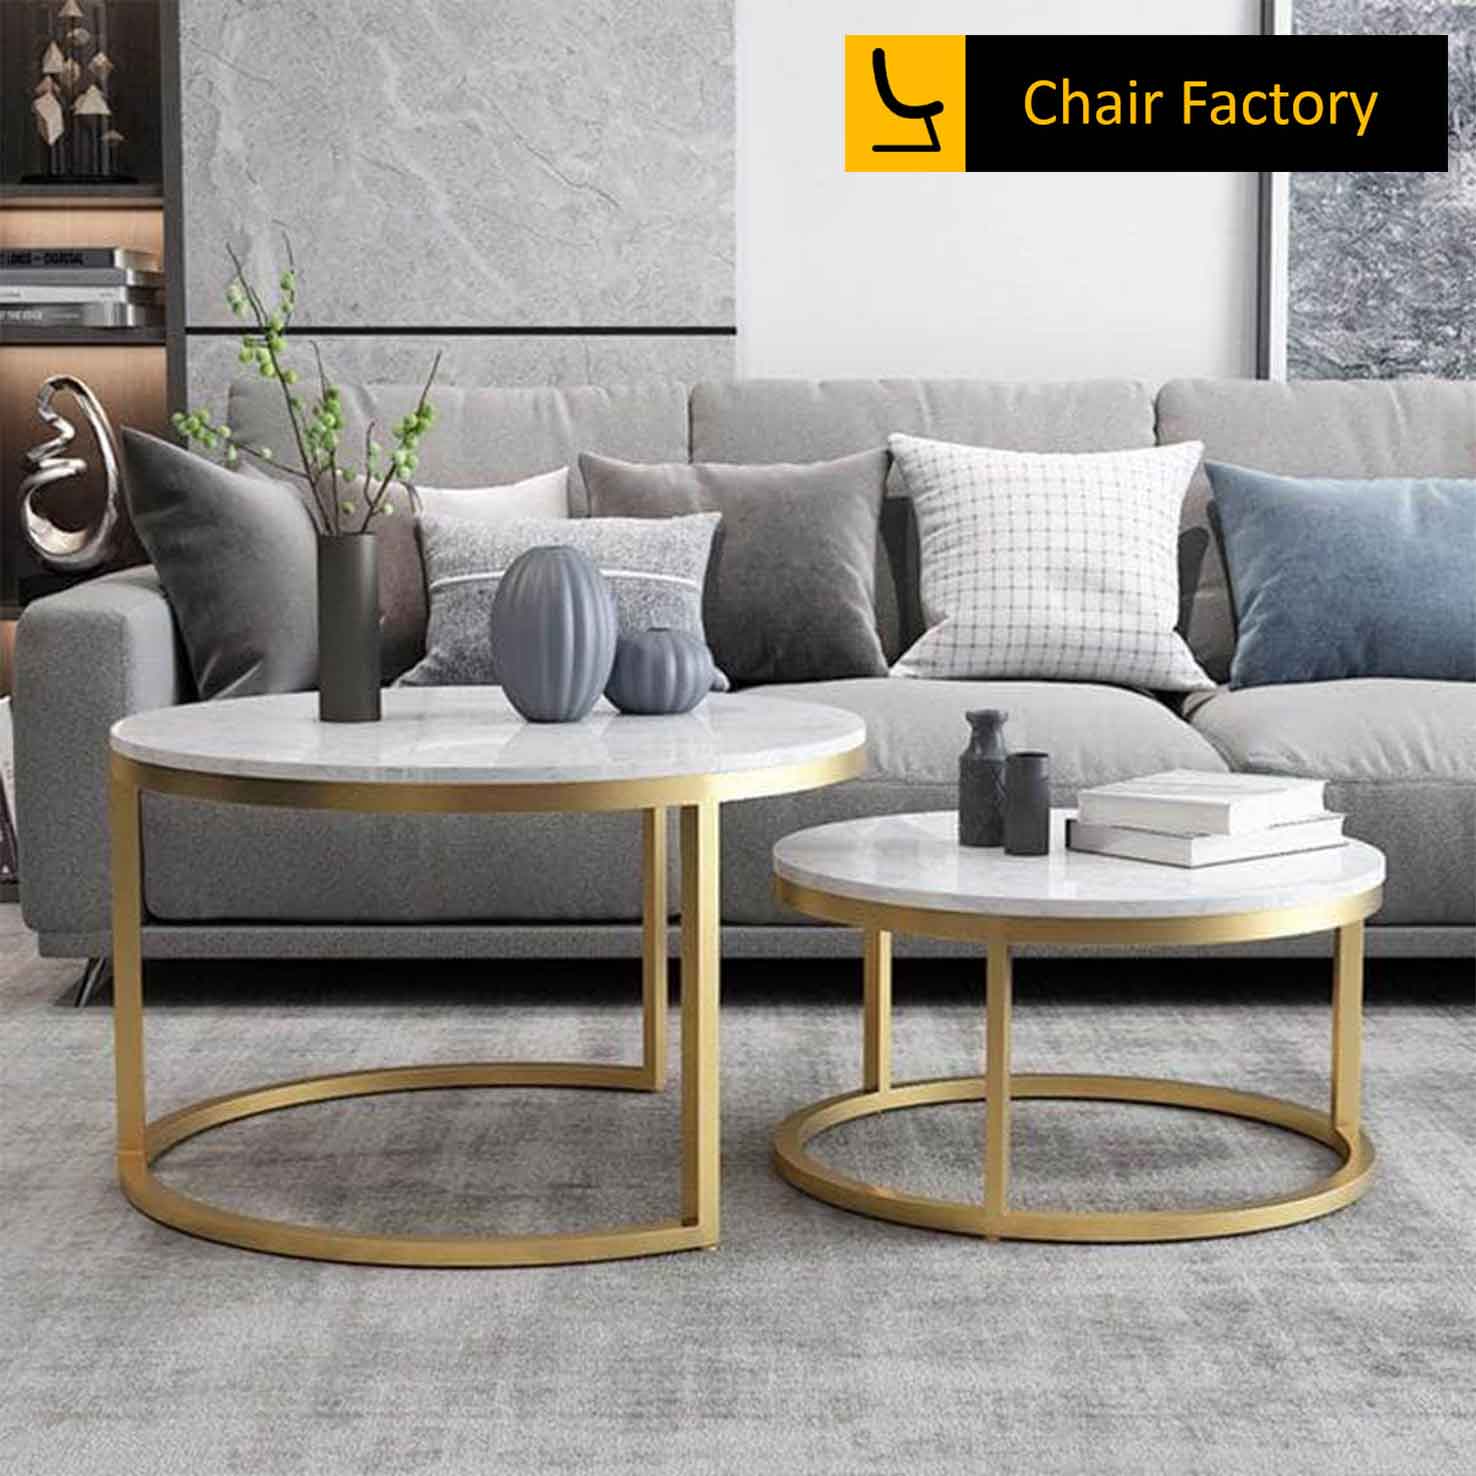 Vitality Centre Table For Home or Office Lobby | Chair Factory